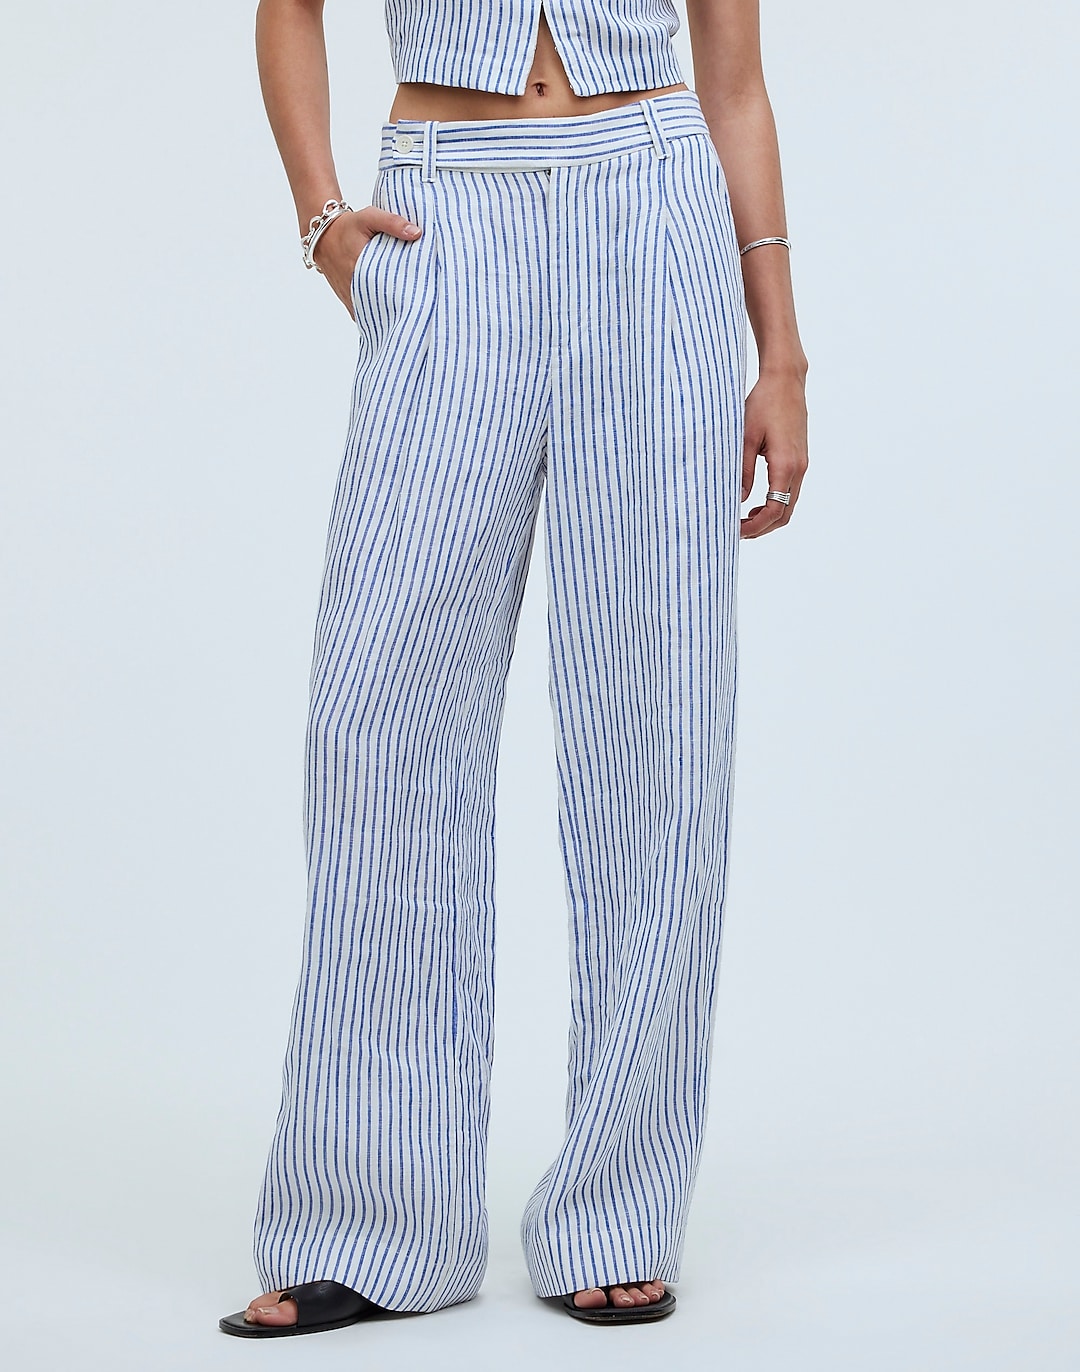 The Harlow Wide-Leg Pant in 100% Linen | Madewell